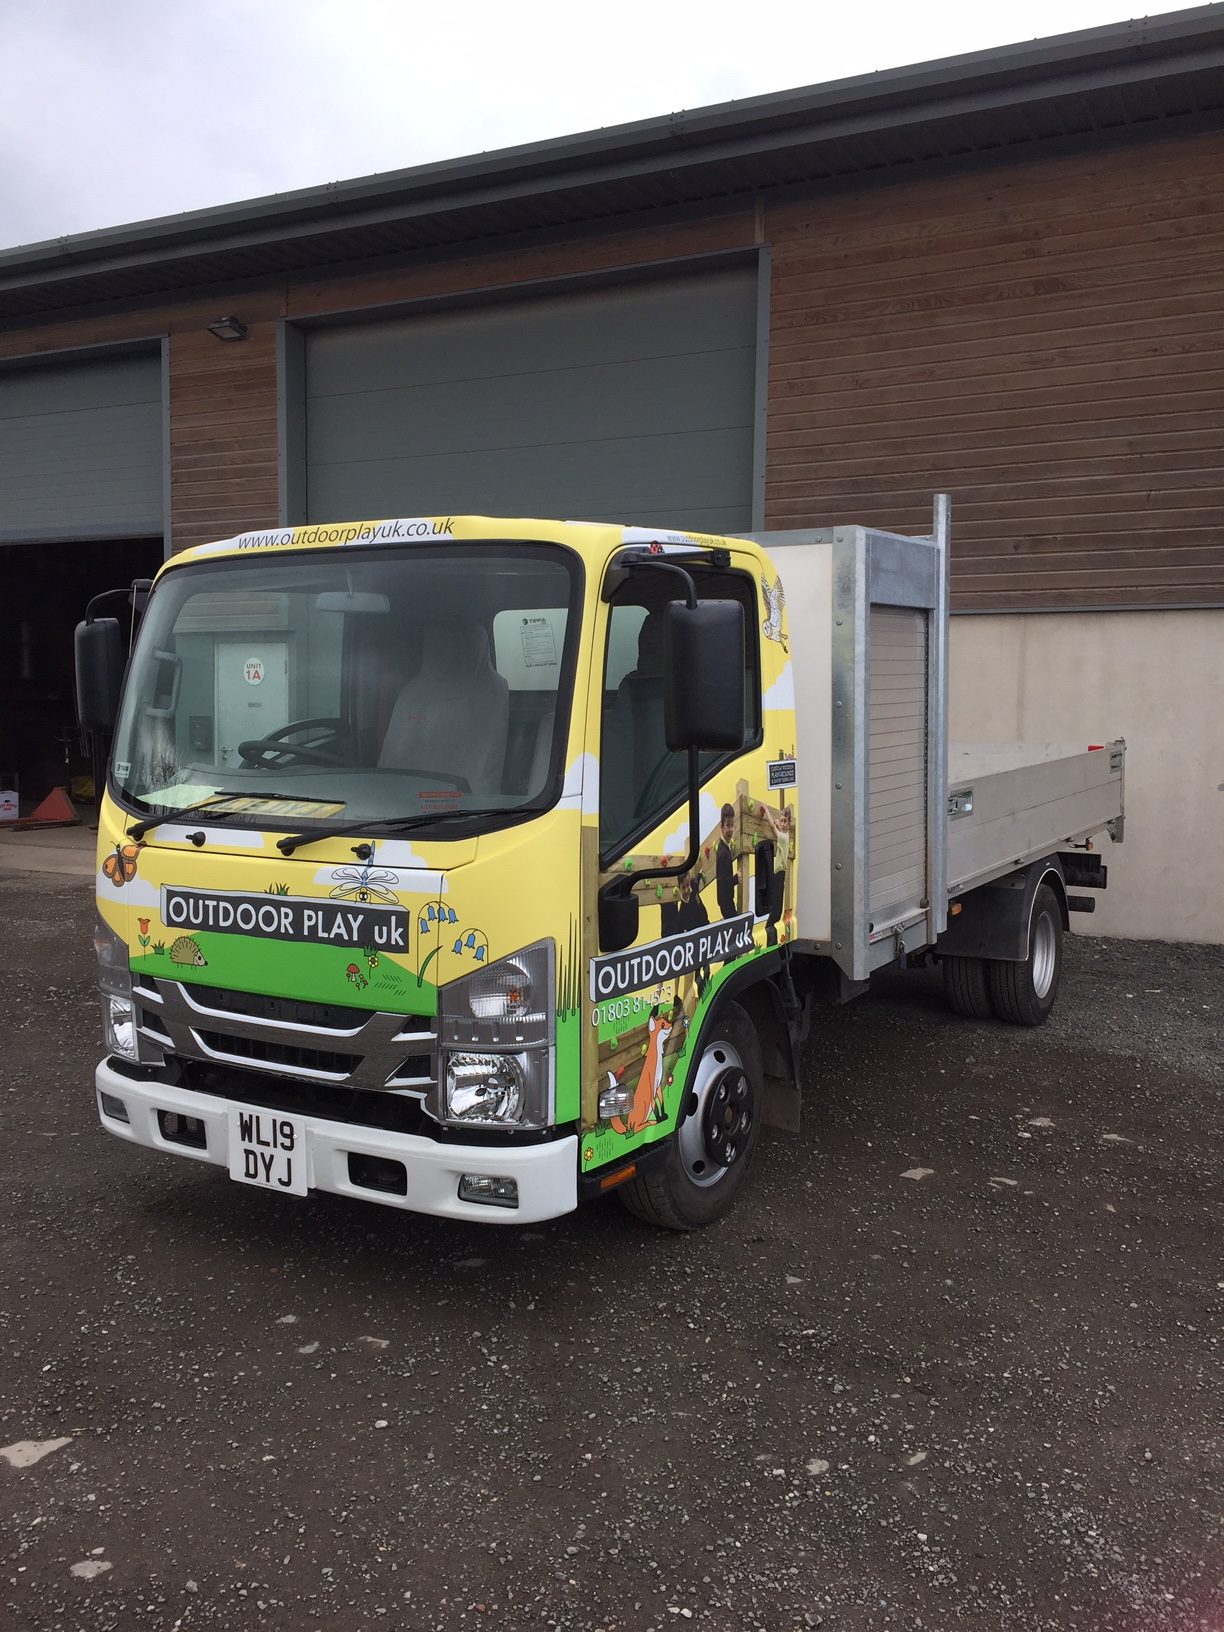 Outdoor play UK buys a new truck